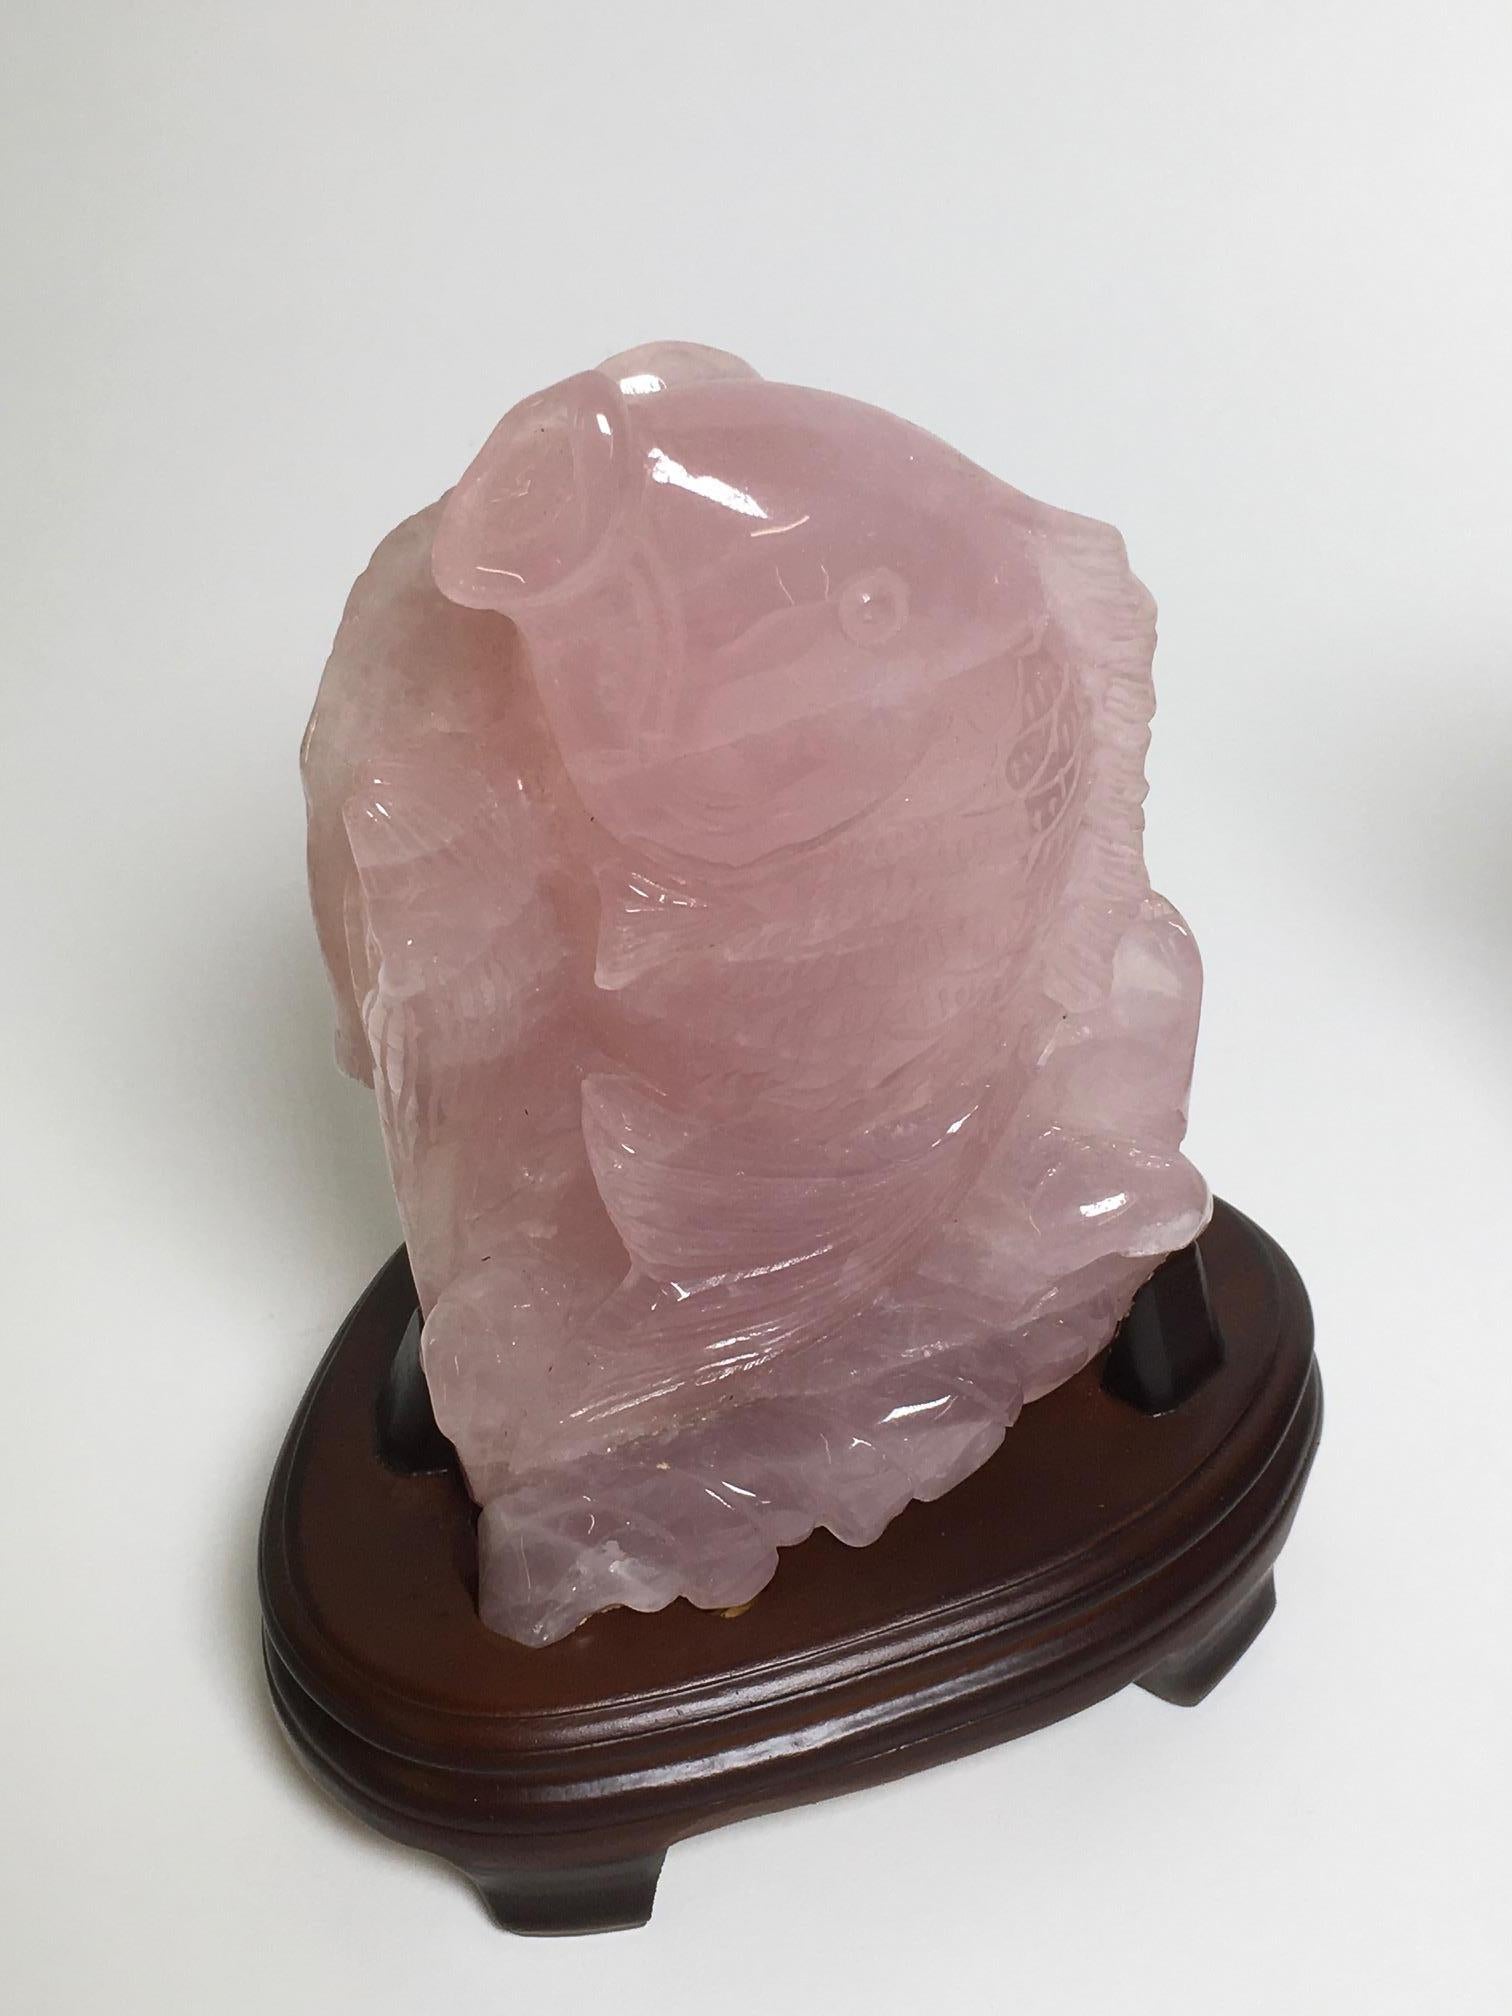 Beautiful carved rose quartz sculptures with wooden base produced in China. Italian private collection.
The dimensions are H 16 cm x W 10 cm x D 8 cm - H 19 cm x W 13 cm x D 9 cm.